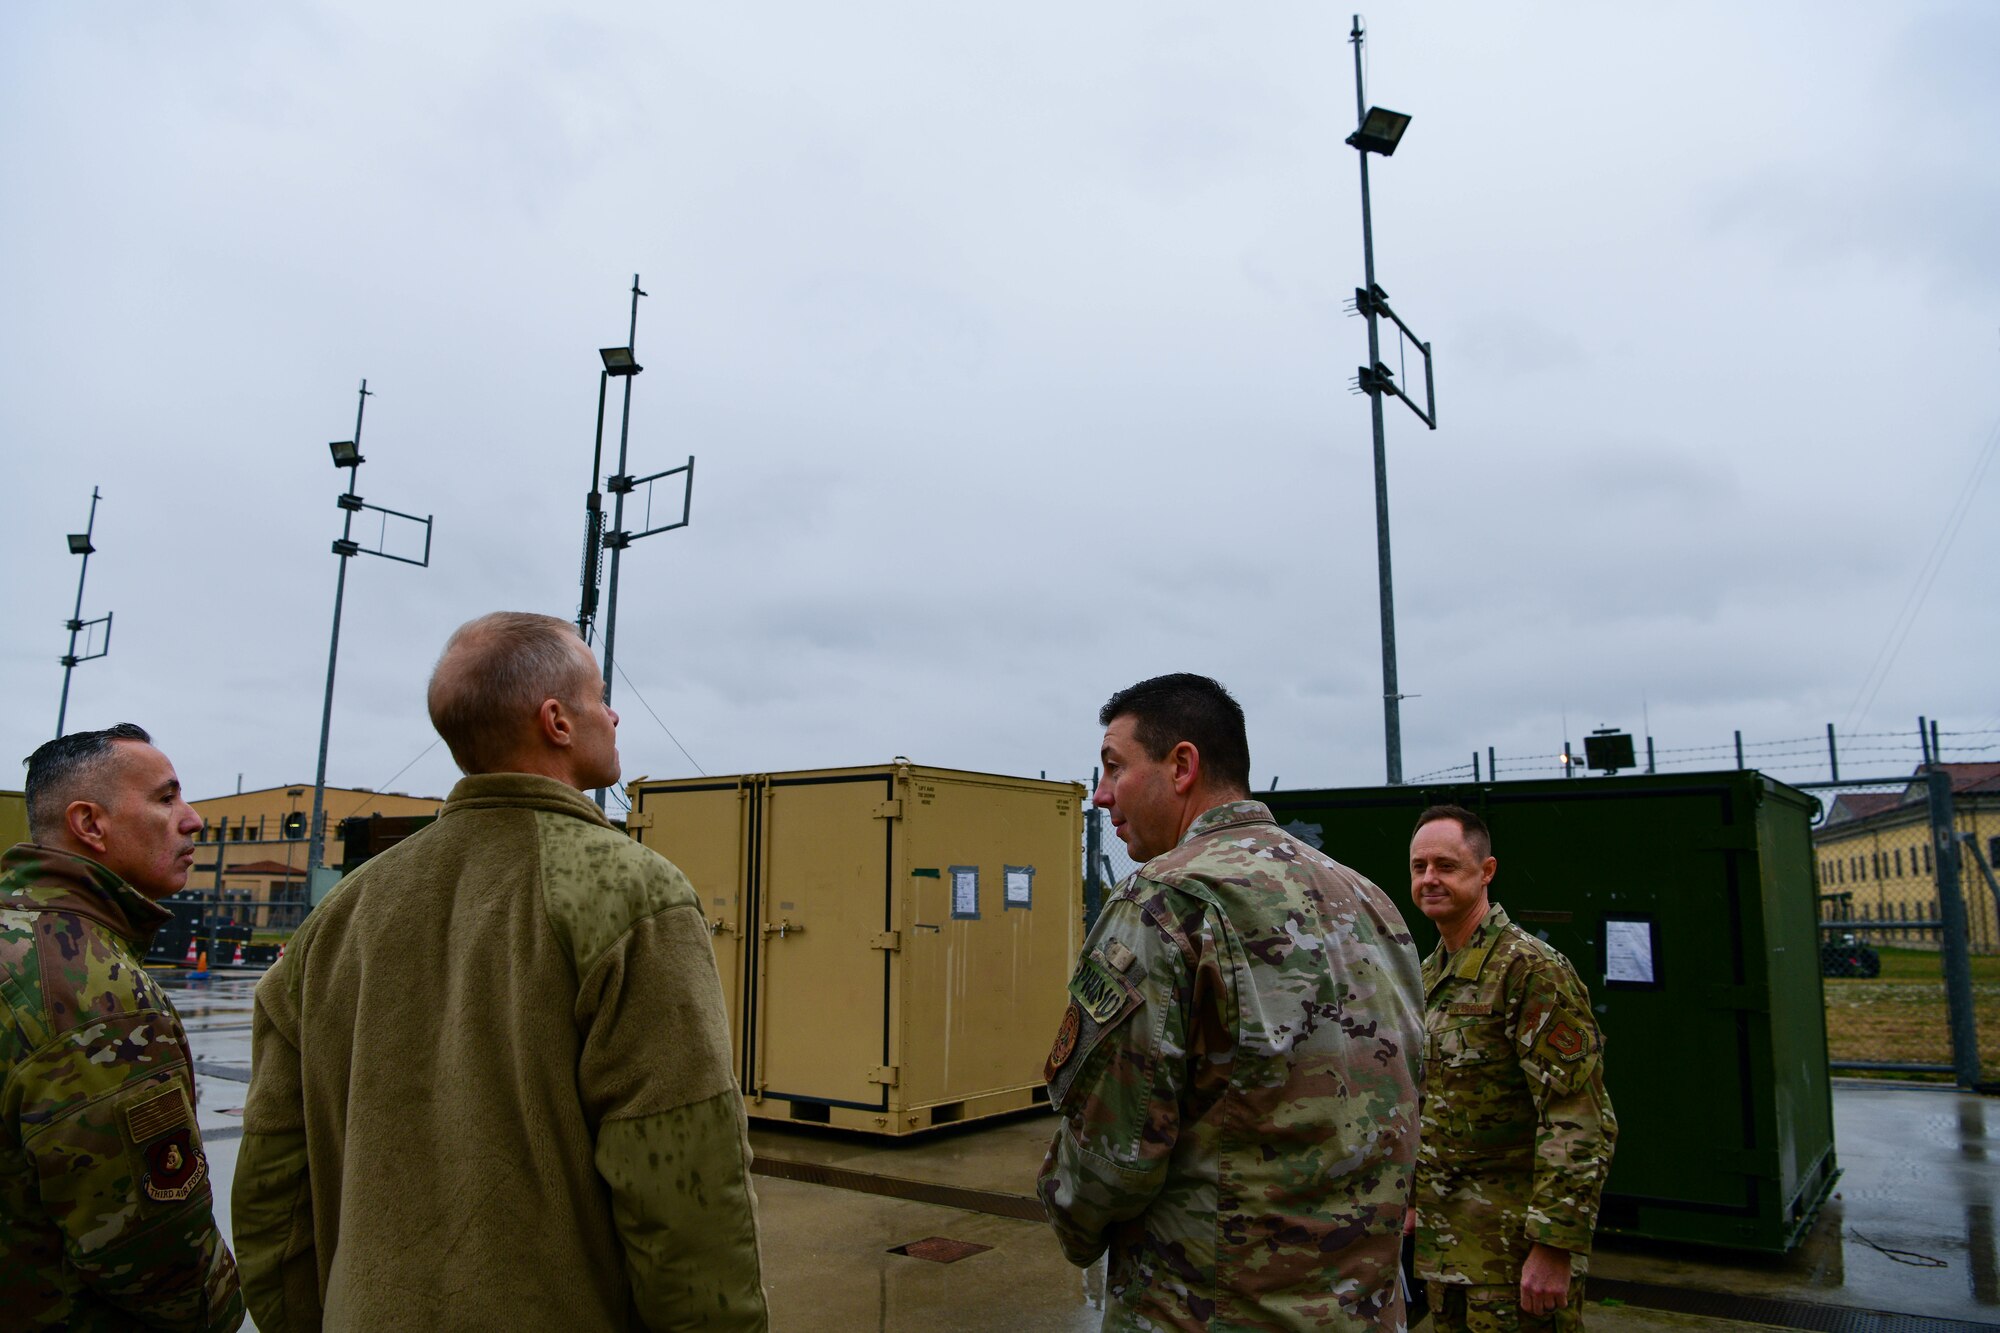 U.S. Air Force Lt. Col. Joseph Faraone, 606th Air Control Squadron commander, middle-right, briefs U.S. Air Force Brig. Gen. Tad Clark, 31st Fighter Wing commander, right, and Third Air Force leadership, left, on 606th ACS equipment and capabilities at Aviano Air Base, Italy, Nov. 22, 2022. This 606th ACS unit is comprised of more than 400 Airmen from 25 diverse Air Force specialty codes and $173M of rapidly deployable equipment including two TPS-75 radars, long-haul communications equipment, generators, tactical vehicles and a computer-based information system providing a real-time battlespace picture. (U.S. Air Force photo by Senior Airman Brooke Moeder)